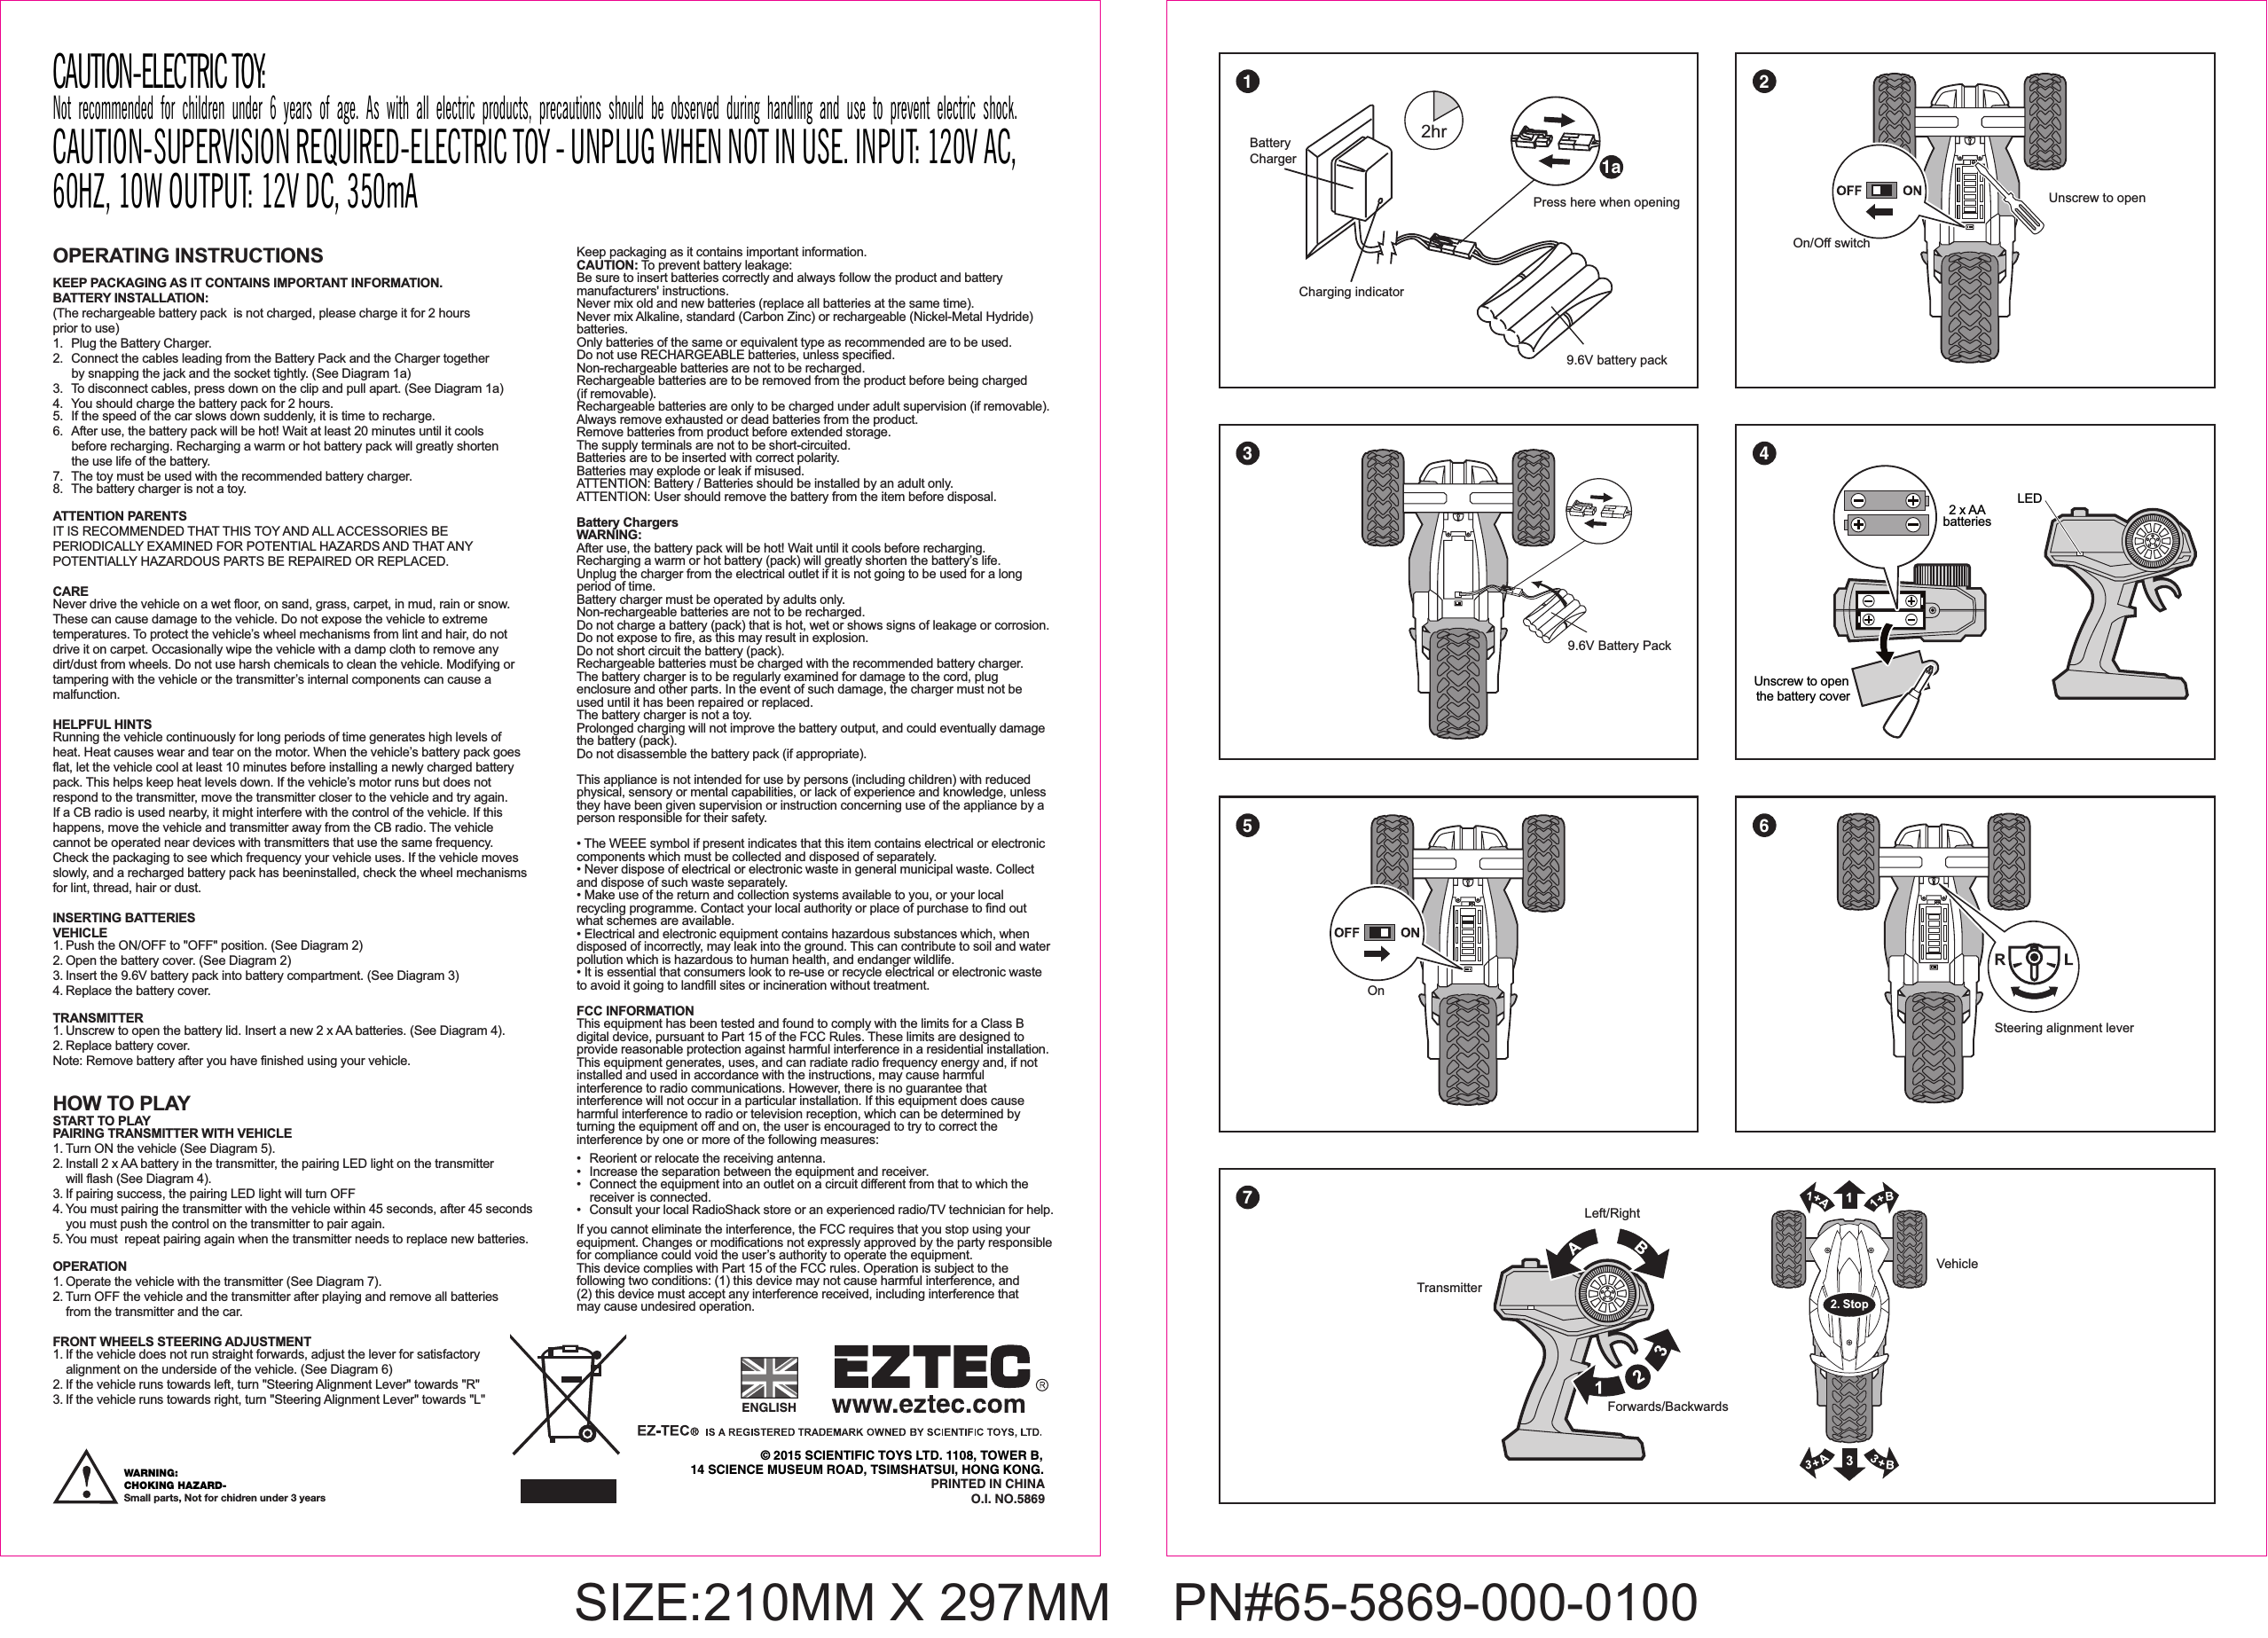 OPERATING INSTRUCTIONS KEEP PACKAGING AS IT CONTAINS IMPORTANT INFORMATION.BATTERY INSTALLATION: (The rechargeable battery pack  is not charged, please charge it for 2 hours prior to use)1. Plug the Battery Charger.2.  Connect the cables leading from the Battery Pack and the Charger together  by snapping the jack and the socket tightly. (See Diagram 1a)3.  To disconnect cables, press down on the clip and pull apart. (See Diagram 1a)4.  You should charge the battery pack for 2 hours.5.  If the speed of the car slows down suddenly, it is time to recharge. 6.  After use, the battery pack will be hot! Wait at least 20 minutes until it cools   before recharging. Recharging a warm or hot battery pack will greatly shorten   the use life of the battery.7.  The toy must be used with the recommended battery charger.8.  The battery charger is not a toy.ATTENTION PARENTSIT IS RECOMMENDED THAT THIS TOY AND ALL ACCESSORIES BE PERIODICALLY EXAMINED FOR POTENTIAL HAZARDS AND THAT ANY POTENTIALLY HAZARDOUS PARTS BE REPAIRED OR REPLACED.CARENever drive the vehicle on a wet floor, on sand, grass, carpet, in mud, rain or snow. These can cause damage to the vehicle. Do not expose the vehicle to extreme temperatures. To protect the vehicle’s wheel mechanisms from lint and hair, do not drive it on carpet. Occasionally wipe the vehicle with a damp cloth to remove any dirt/dust from wheels. Do not use harsh chemicals to clean the vehicle. Modifying or tampering with the vehicle or the transmitter’s internal components can cause a malfunction. HELPFUL HINTSRunning the vehicle continuously for long periods of time generates high levels of heat. Heat causes wear and tear on the motor. When the vehicle’s battery pack goes flat, let the vehicle cool at least 10 minutes before installing a newly charged battery pack. This helps keep heat levels down. If the vehicle’s motor runs but does not respond to the transmitter, move the transmitter closer to the vehicle and try again. If a CB radio is used nearby, it might interfere with the control of the vehicle. If this happens, move the vehicle and transmitter away from the CB radio. The vehicle cannot be operated near devices with transmitters that use the same frequency. Check the packaging to see which frequency your vehicle uses. If the vehicle moves slowly, and a recharged battery pack has beeninstalled, check the wheel mechanisms for lint, thread, hair or dust.INSERTING BATTERIES VEHICLE1. Push the ON/OFF to &quot;OFF&quot; position. (See Diagram 2)2. Open the battery cover. (See Diagram 2)3. Insert the 9.6V battery pack into battery compartment. (See Diagram 3)  4. Replace the battery cover. TRANSMITTER1. Unscrew to open the battery lid. Insert a new 2 x AA batteries. (See Diagram 4). 2. Replace battery cover.Note: Remove battery after you have finished using your vehicle.HOW TO PLAYSTART TO PLAYPAIRING TRANSMITTER WITH VEHICLE1. Turn ON the vehicle (See Diagram 5).2. Install 2 x AA battery in the transmitter, the pairing LED light on the transmitter   will flash (See Diagram 4).3. If pairing success, the pairing LED light will turn OFF4. You must pairing the transmitter with the vehicle within 45 seconds, after 45 seconds   you must push the control on the transmitter to pair again.5. You must  repeat pairing again when the transmitter needs to replace new batteries.OPERATION1. Operate the vehicle with the transmitter (See Diagram 7).2. Turn OFF the vehicle and the transmitter after playing and remove all batteries   from the transmitter and the car.FRONT WHEELS STEERING ADJUSTMENT1. If the vehicle does not run straight forwards, adjust the lever for satisfactory   alignment on the underside of the vehicle. (See Diagram 6)2. If the vehicle runs towards left, turn &quot;Steering Alignment Lever&quot; towards &quot;R&quot;3. If the vehicle runs towards right, turn &quot;Steering Alignment Lever&quot; towards &quot;L&quot;On/Off switchUnscrew to openOn© 2015 SCIENTIFIC TOYS LTD. 1108, TOWER B,14 SCIENCE MUSEUM ROAD, TSIMSHATSUI, HONG KONG.PRINTED IN CHINAO.I. NO.5869ENGLISHVehicleTransmitterForwards/BackwardsLeft/RightSteering alignment leverSIZE:210MM X 297MM   PN#65-5869-000-01009.6V Battery Pack Keep packaging as it contains important information.CAUTION: To prevent battery leakage:Be sure to insert batteries correctly and always follow the product and battery manufacturers&apos; instructions.Never mix old and new batteries (replace all batteries at the same time).Never mix Alkaline, standard (Carbon Zinc) or rechargeable (Nickel-Metal Hydride) batteries.Only batteries of the same or equivalent type as recommended are to be used.Do not use RECHARGEABLE batteries, unless specified.Non-rechargeable batteries are not to be recharged.Rechargeable batteries are to be removed from the product before being charged (if removable).Rechargeable batteries are only to be charged under adult supervision (if removable).Always remove exhausted or dead batteries from the product.Remove batteries from product before extended storage.The supply terminals are not to be short-circuited.Batteries are to be inserted with correct polarity.Batteries may explode or leak if misused.ATTENTION: Battery / Batteries should be installed by an adult only.ATTENTION: User should remove the battery from the item before disposal.Battery ChargersWARNING:After use, the battery pack will be hot! Wait until it cools before recharging.Recharging a warm or hot battery (pack) will greatly shorten the battery’s life.Unplug the charger from the electrical outlet if it is not going to be used for a long period of time.Battery charger must be operated by adults only.Non-rechargeable batteries are not to be recharged.Do not charge a battery (pack) that is hot, wet or shows signs of leakage or corrosion.Do not expose to fire, as this may result in explosion.Do not short circuit the battery (pack).Rechargeable batteries must be charged with the recommended battery charger.The battery charger is to be regularly examined for damage to the cord, plug enclosure and other parts. In the event of such damage, the charger must not be used until it has been repaired or replaced.The battery charger is not a toy.Prolonged charging will not improve the battery output, and could eventually damage the battery (pack).Do not disassemble the battery pack (if appropriate).This appliance is not intended for use by persons (including children) with reduced physical, sensory or mental capabilities, or lack of experience and knowledge, unless they have been given supervision or instruction concerning use of the appliance by a person responsible for their safety.• The WEEE symbol if present indicates that this item contains electrical or electronic components which must be collected and disposed of separately.• Never dispose of electrical or electronic waste in general municipal waste. Collect and dispose of such waste separately.• Make use of the return and collection systems available to you, or your local recycling programme. Contact your local authority or place of purchase to find out what schemes are available.• Electrical and electronic equipment contains hazardous substances which, when disposed of incorrectly, may leak into the ground. This can contribute to soil and water pollution which is hazardous to human health, and endanger wildlife.• It is essential that consumers look to re-use or recycle electrical or electronic waste to avoid it going to landfill sites or incineration without treatment.FCC INFORMATIONThis equipment has been tested and found to comply with the limits for a Class B digital device, pursuant to Part 15 of the FCC Rules. These limits are designed to provide reasonable protection against harmful interference in a residential installation. This equipment generates, uses, and can radiate radio frequency energy and, if not installed and used in accordance with the instructions, may cause harmful interference to radio communications. However, there is no guarantee that interference will not occur in a particular installation. If this equipment does cause harmful interference to radio or television reception, which can be determined by turning the equipment off and on, the user is encouraged to try to correct the interference by one or more of the following measures:•   Reorient or relocate the receiving antenna.•   Increase the separation between the equipment and receiver.•   Connect the equipment into an outlet on a circuit different from that to which the   receiver is connected.•   Consult your local RadioShack store or an experienced radio/TV technician for help.If you cannot eliminate the interference, the FCC requires that you stop using your equipment. Changes or modifications not expressly approved by the party responsible for compliance could void the user’s authority to operate the equipment.This device complies with Part 15 of the FCC rules. Operation is subject to the following two conditions: (1) this device may not cause harmful interference, and (2) this device must accept any interference received, including interference that may cause undesired operation.Unscrew to open the battery cover2 x AAbatteriesLEDBatteryCharger2hrCharging indicator9.6V battery packPress here when opening1 23 45 671aWARNING: CHOKING HAZARD-Small parts, Not for chidren under 3 yearsCAUTION-ELECTRIC TOY: Not recommended for children under 6 years of age. As with all electric products, precautions should be observed during handling and use to prevent electric shock.CAUTION-SUPERVISION REQUIRED-ELECTRIC TOY - UNPLUG WHEN NOT IN USE. INPUT: 120V AC, 60HZ, 10W OUTPUT: 12V DC, 350mA